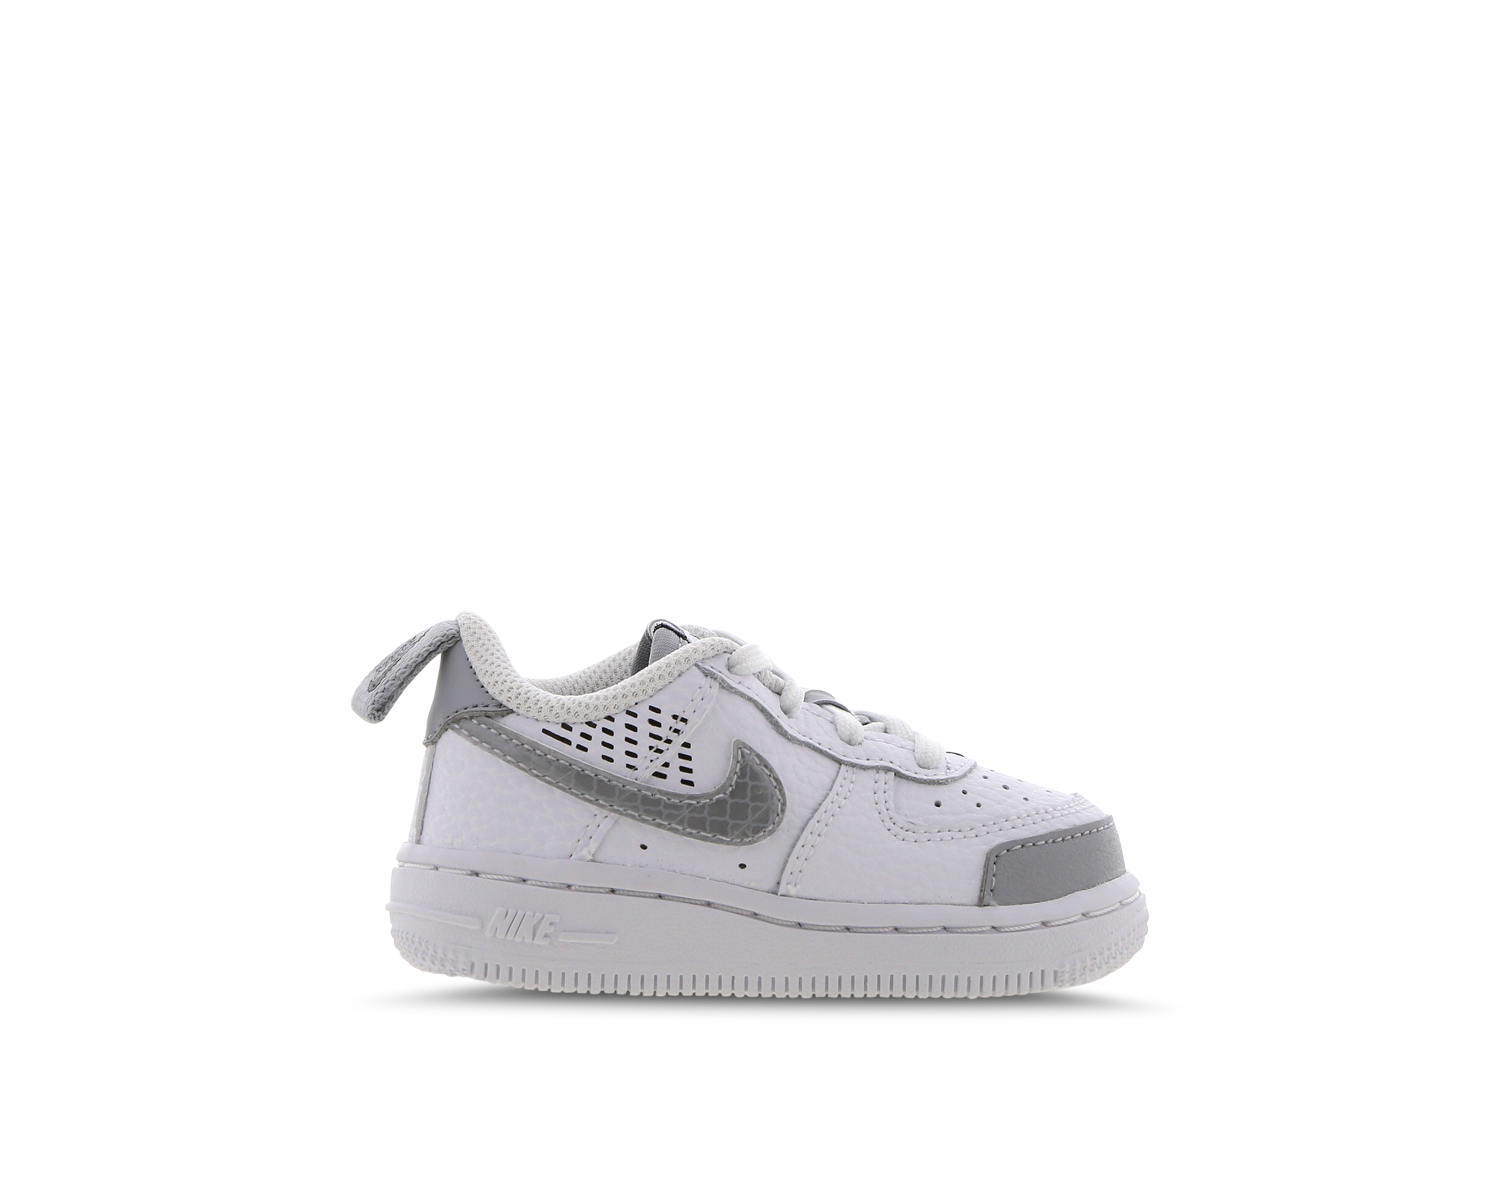 nike air force 1 under construction women's